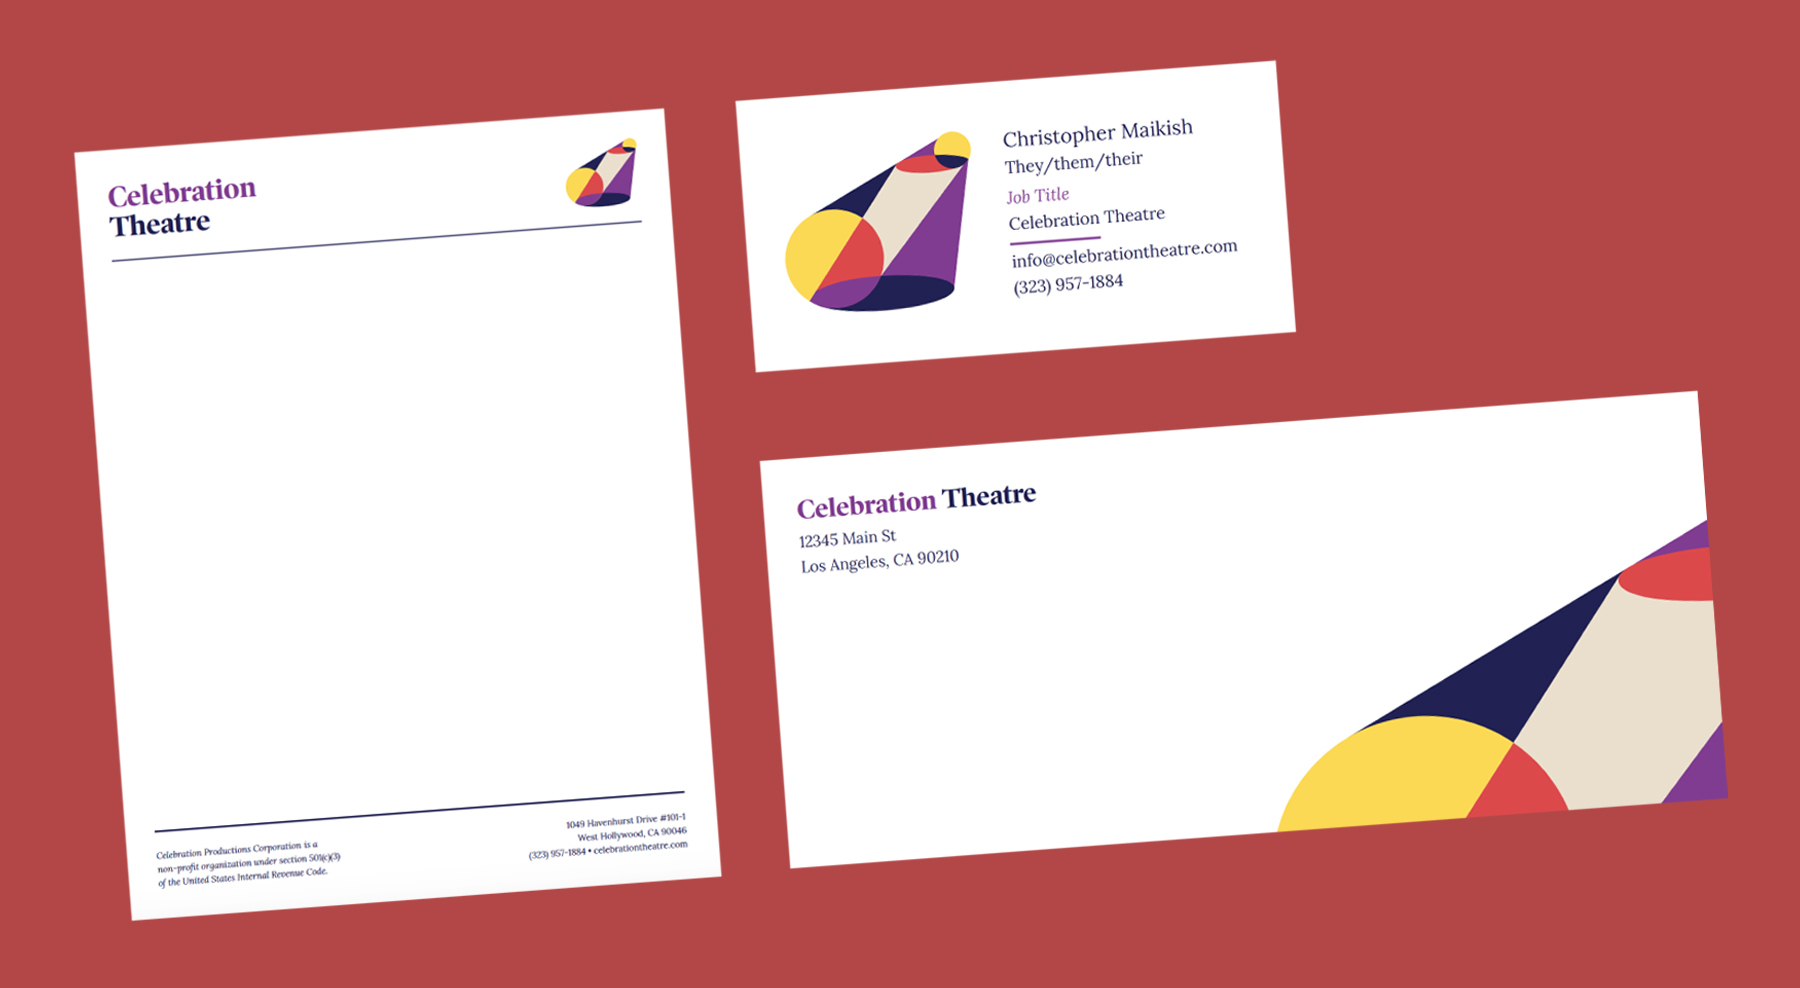 An upbeat rebrand for Celebration Theatre, the oldest LGBTQ+ theatre in Los Angeles, CA.